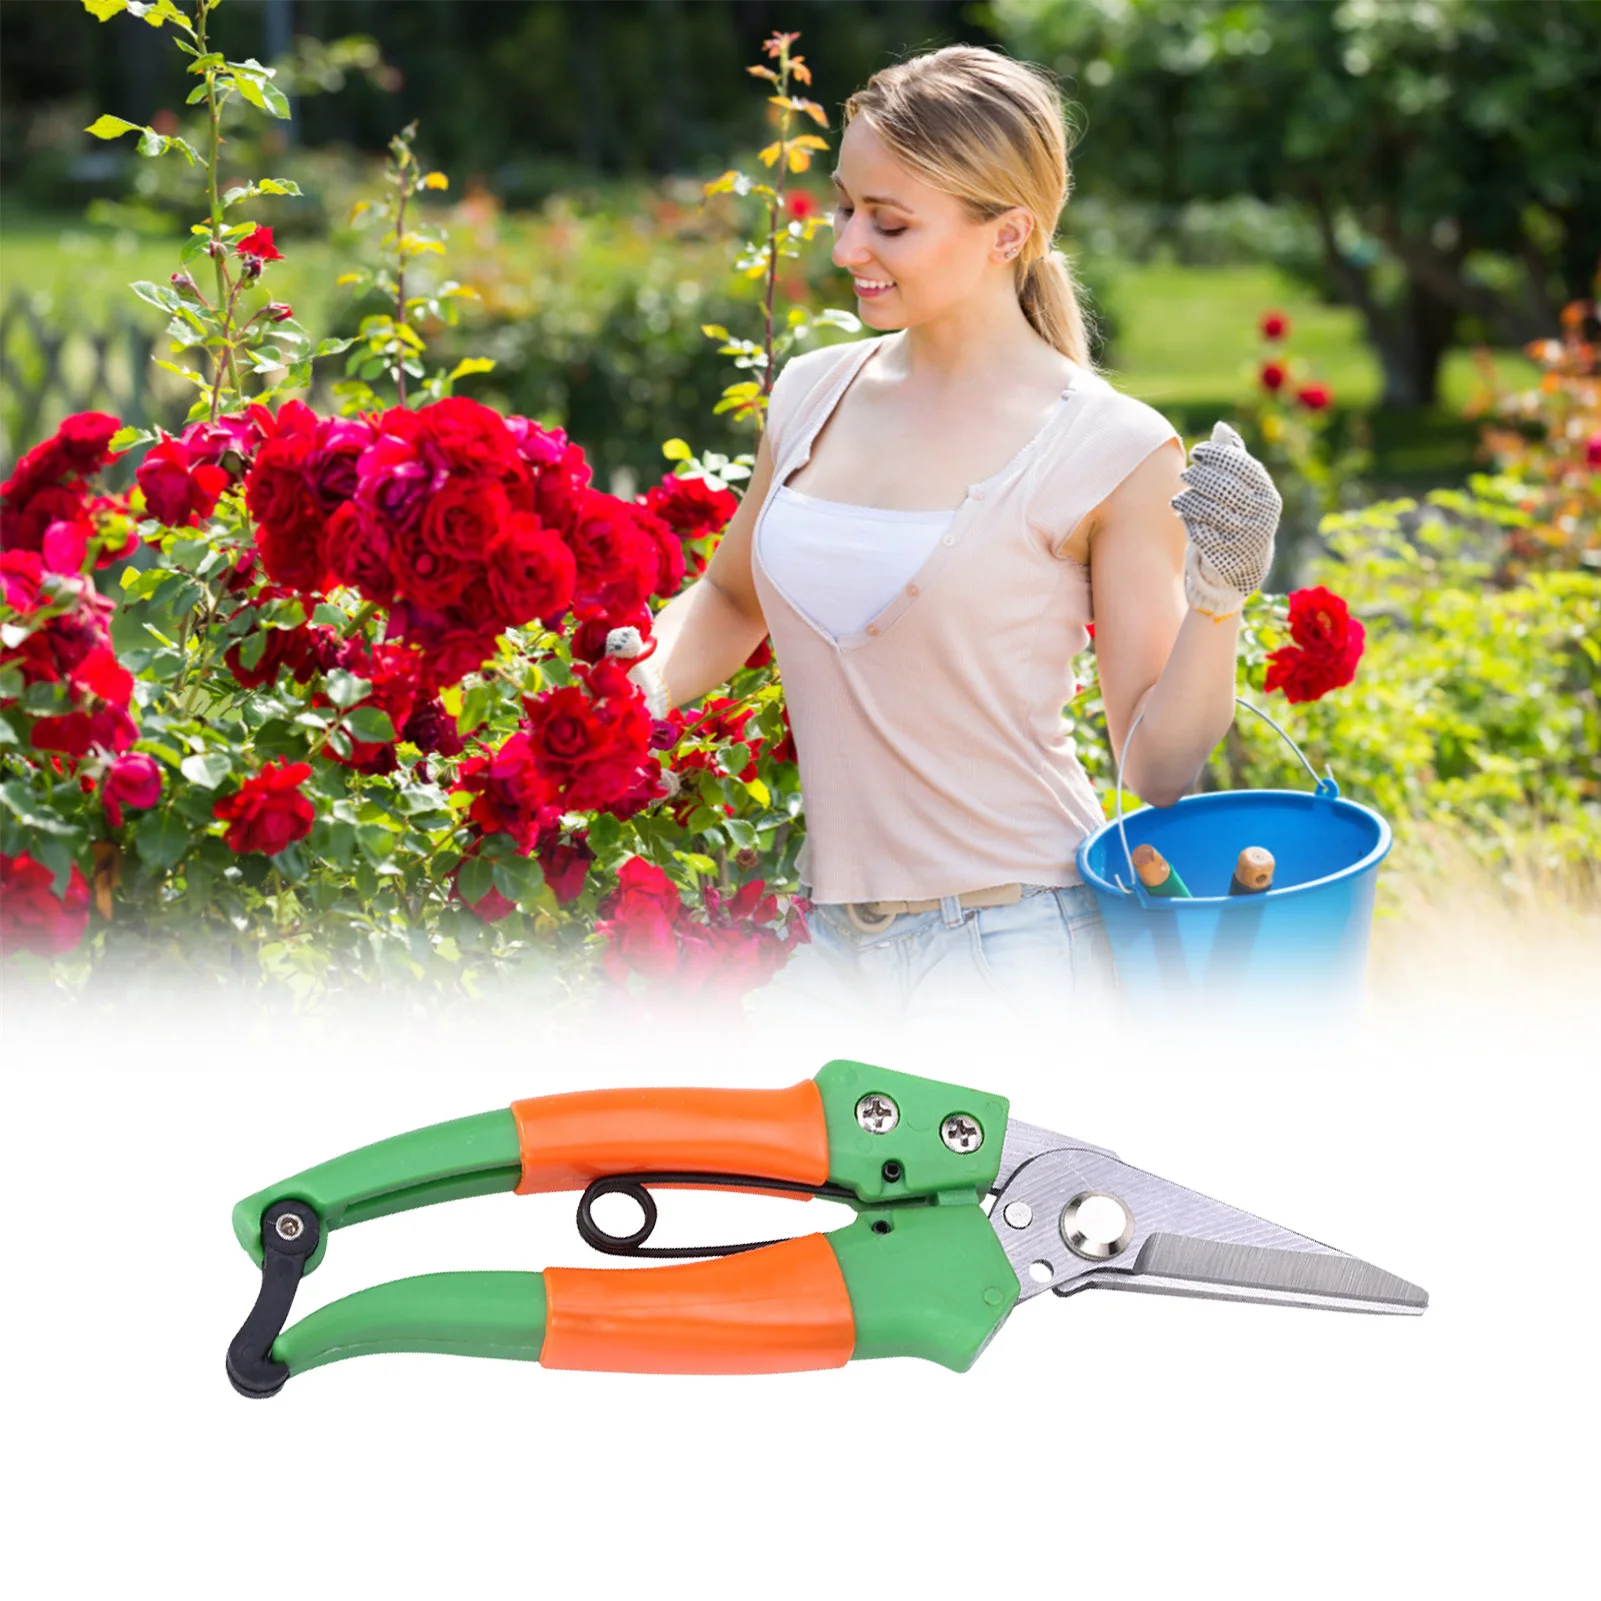 

Pruning Shears Professional Sharp Orchard Pruning Shears Tree Branch Cutting Trimmers Secateurs Hand Gardening Pruner Clippers